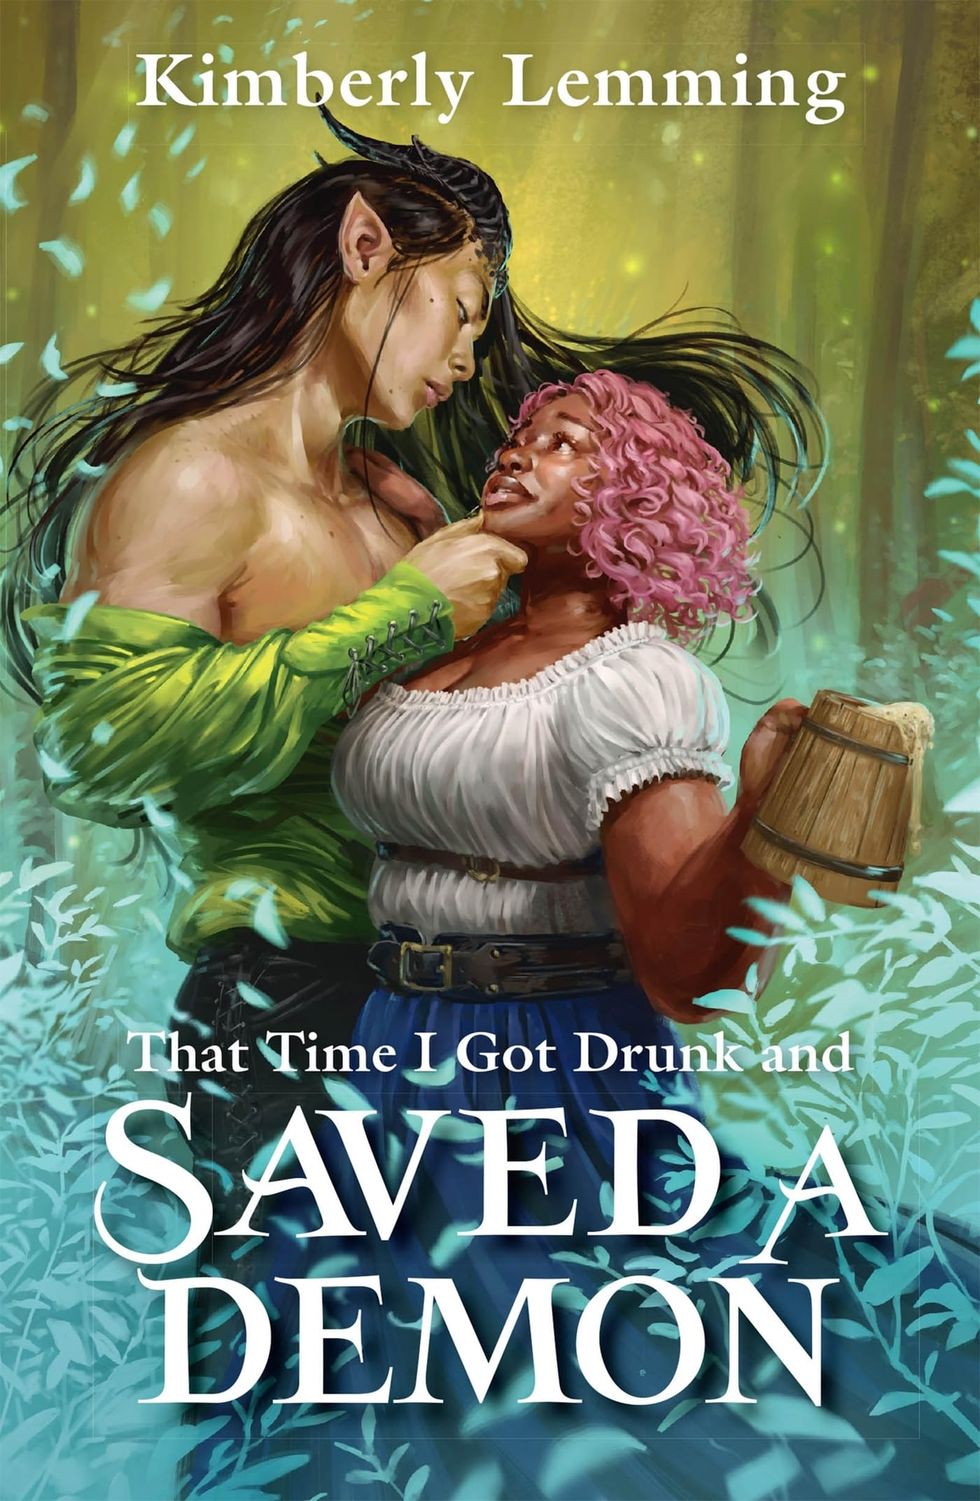 That Time I Got Drunk and Saved a Demon by Kimberly Lemming 